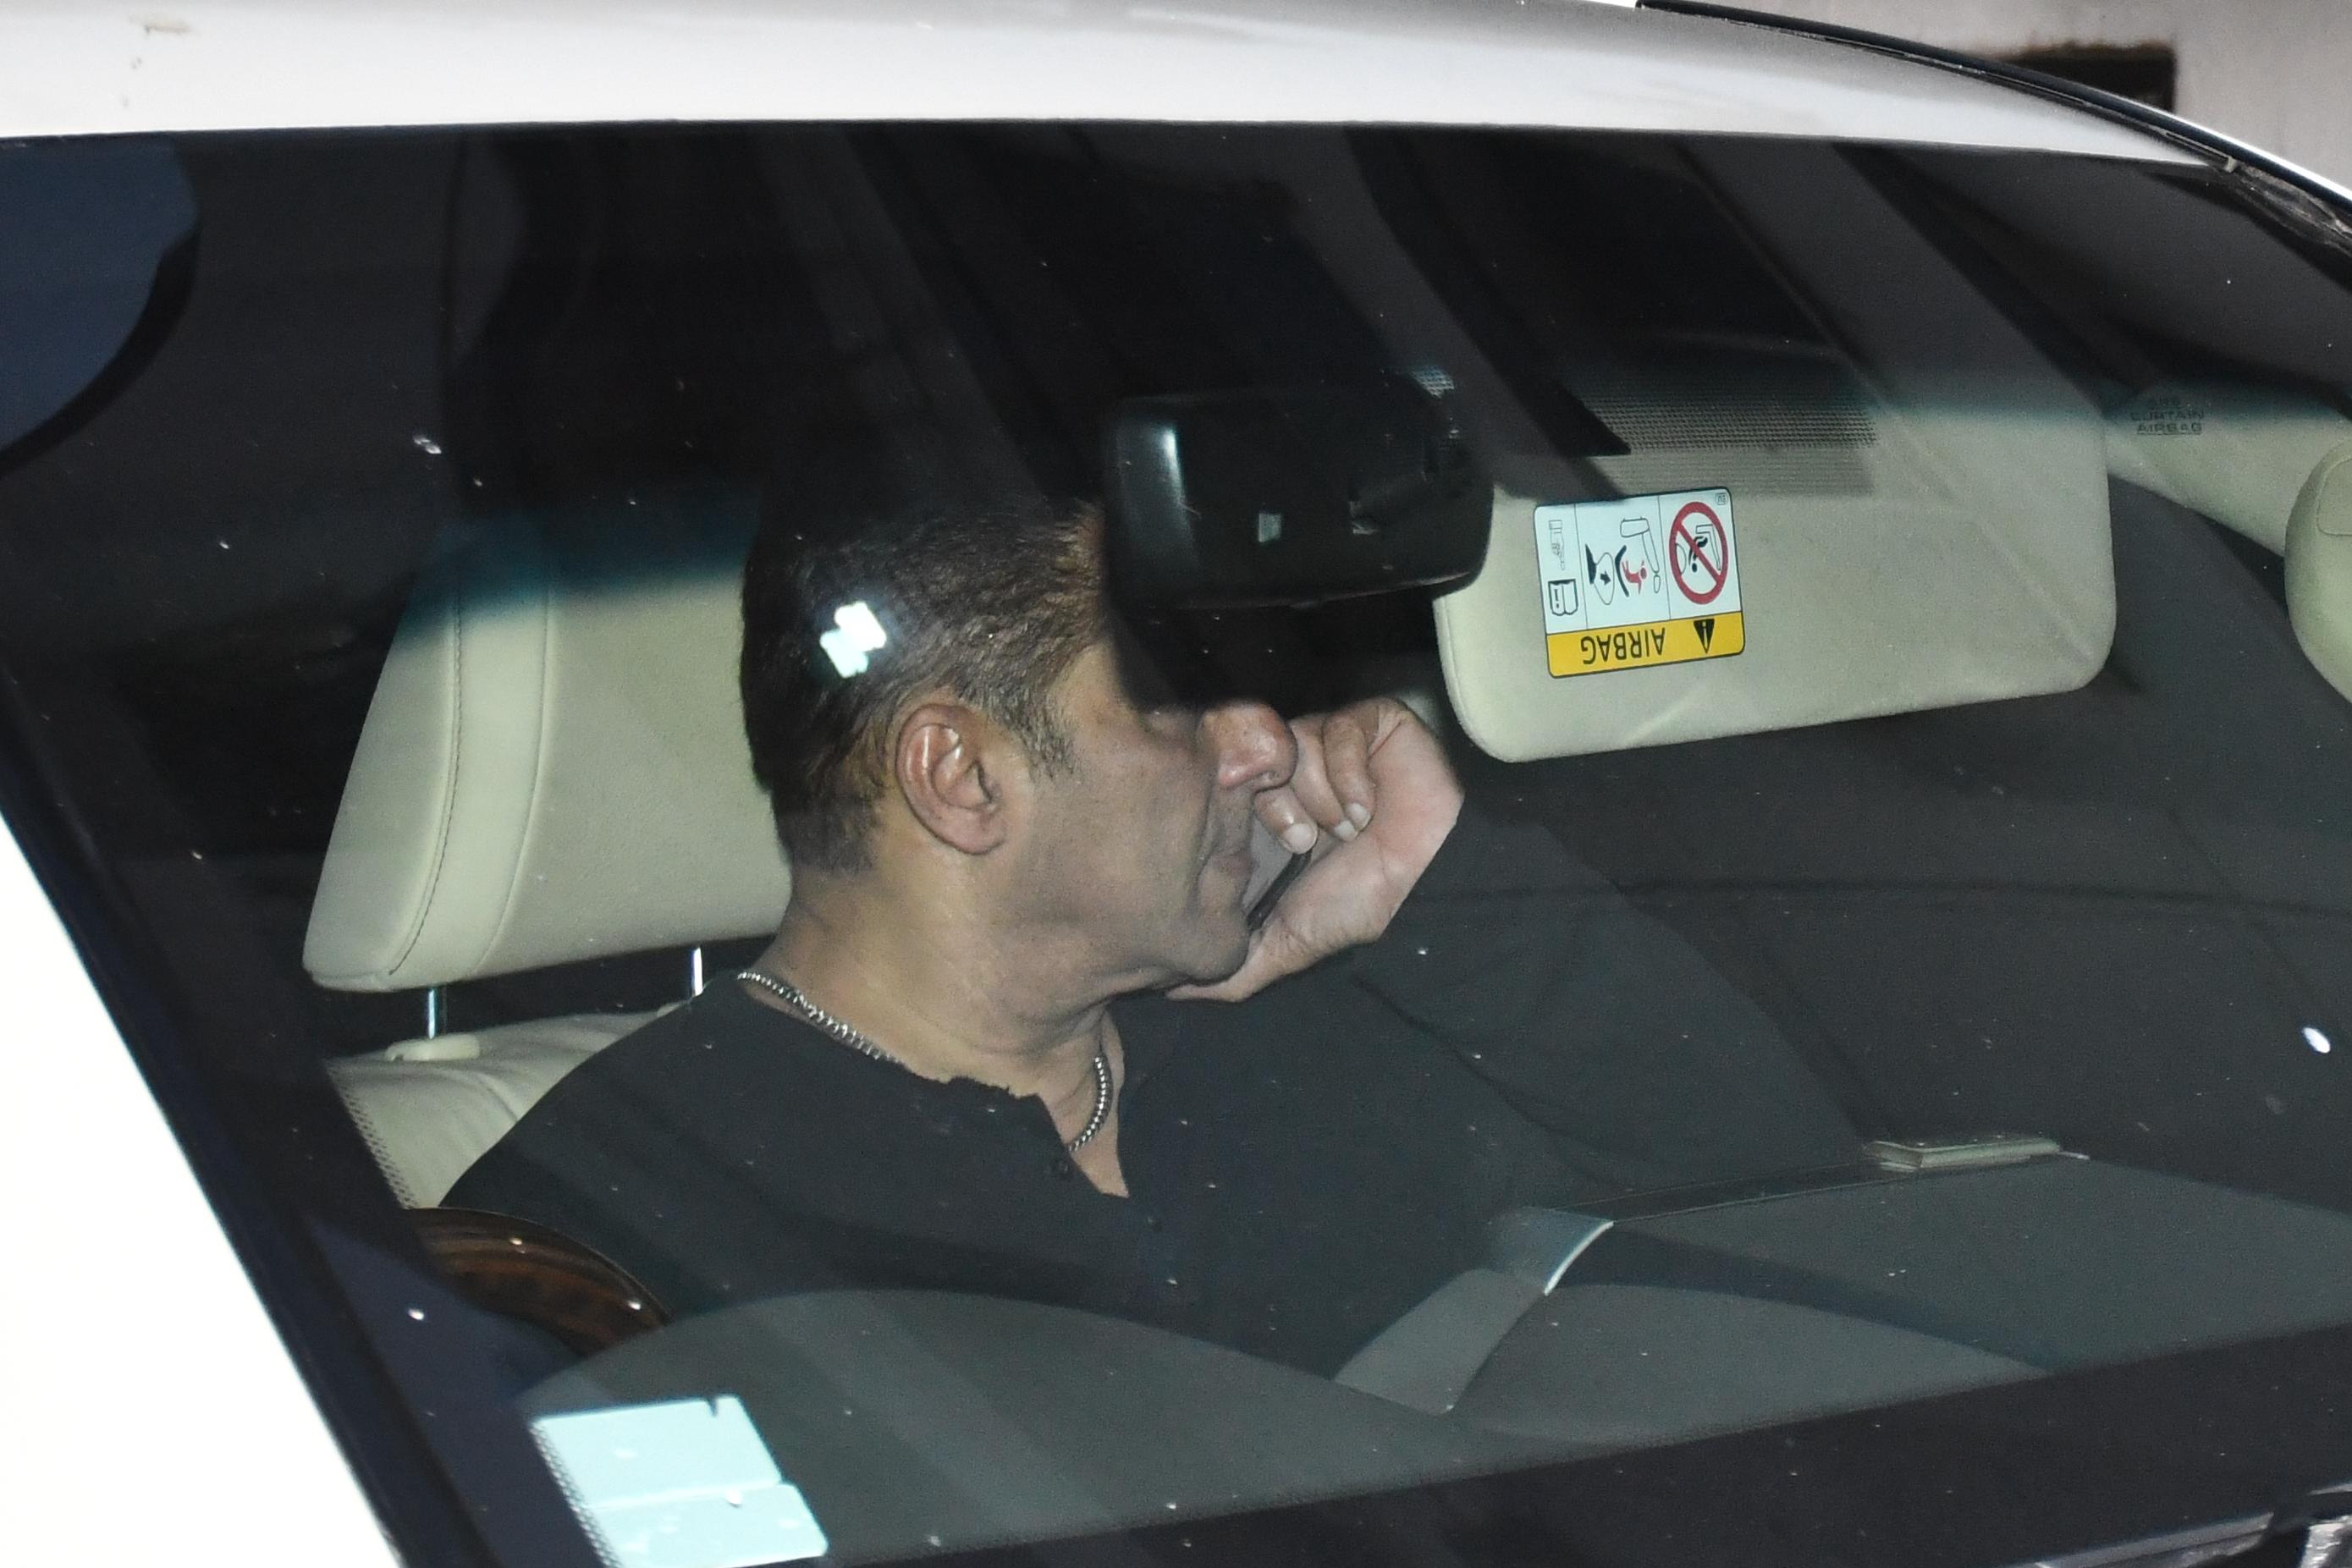 Salman Khan was spotted outside his residence after the firing incident